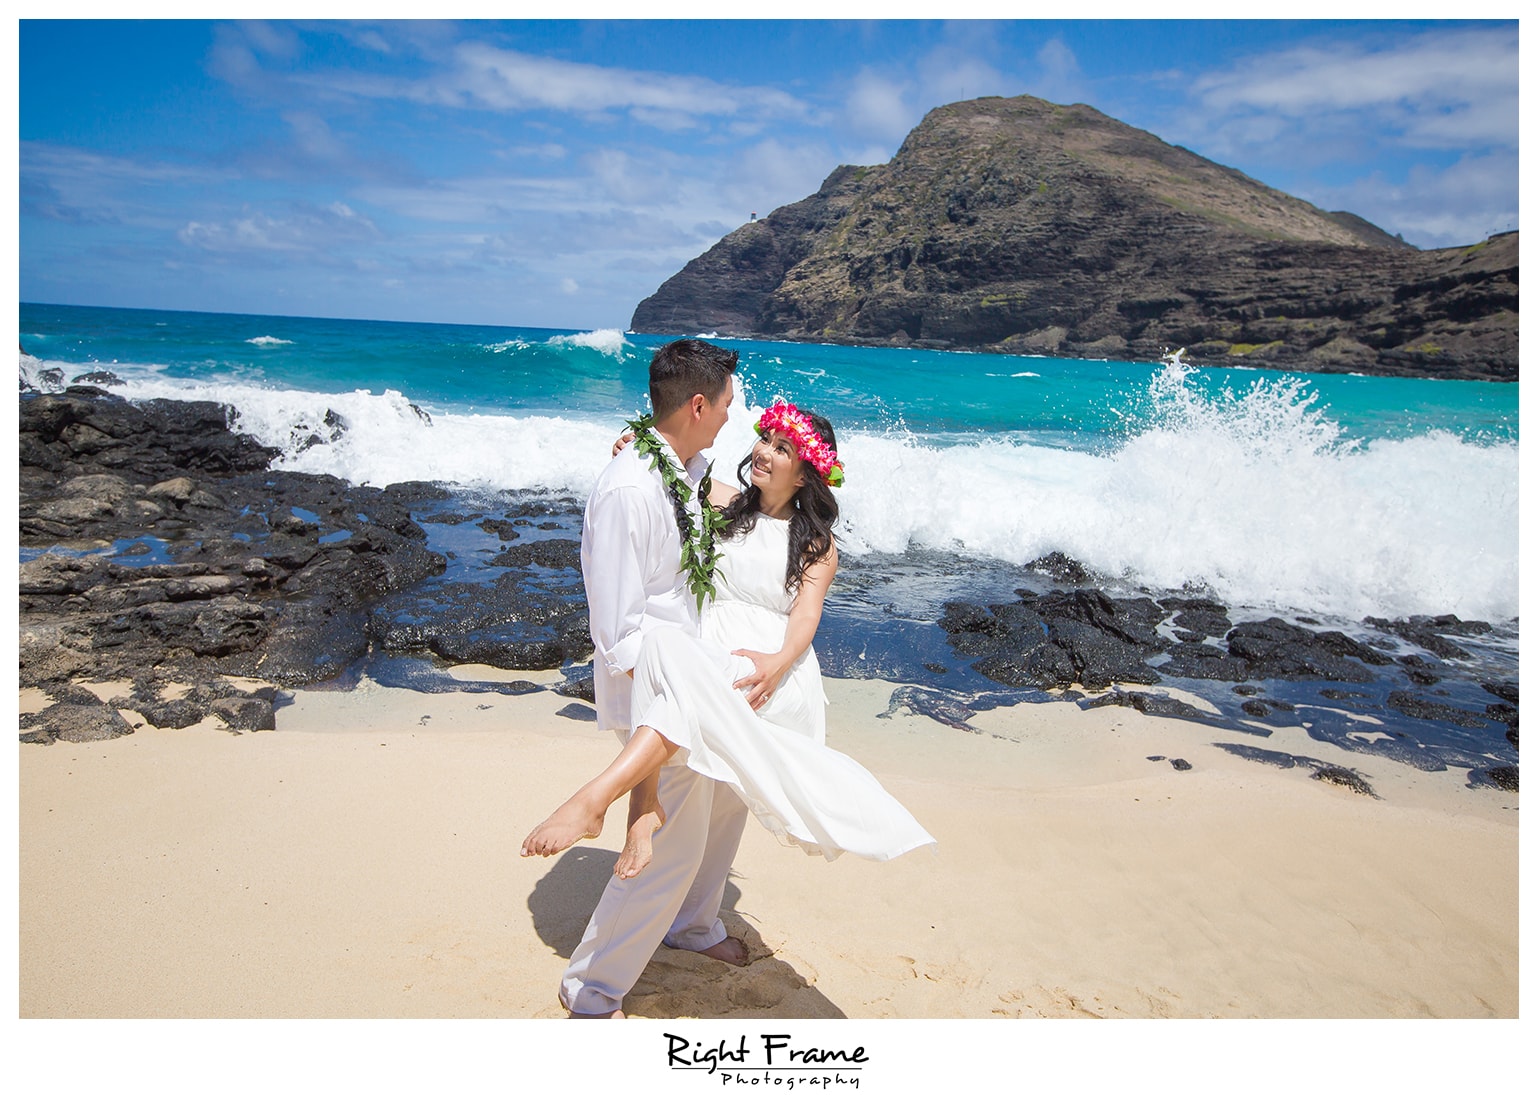 Right Frame Photography Hawaii Wedding Vow Renewal